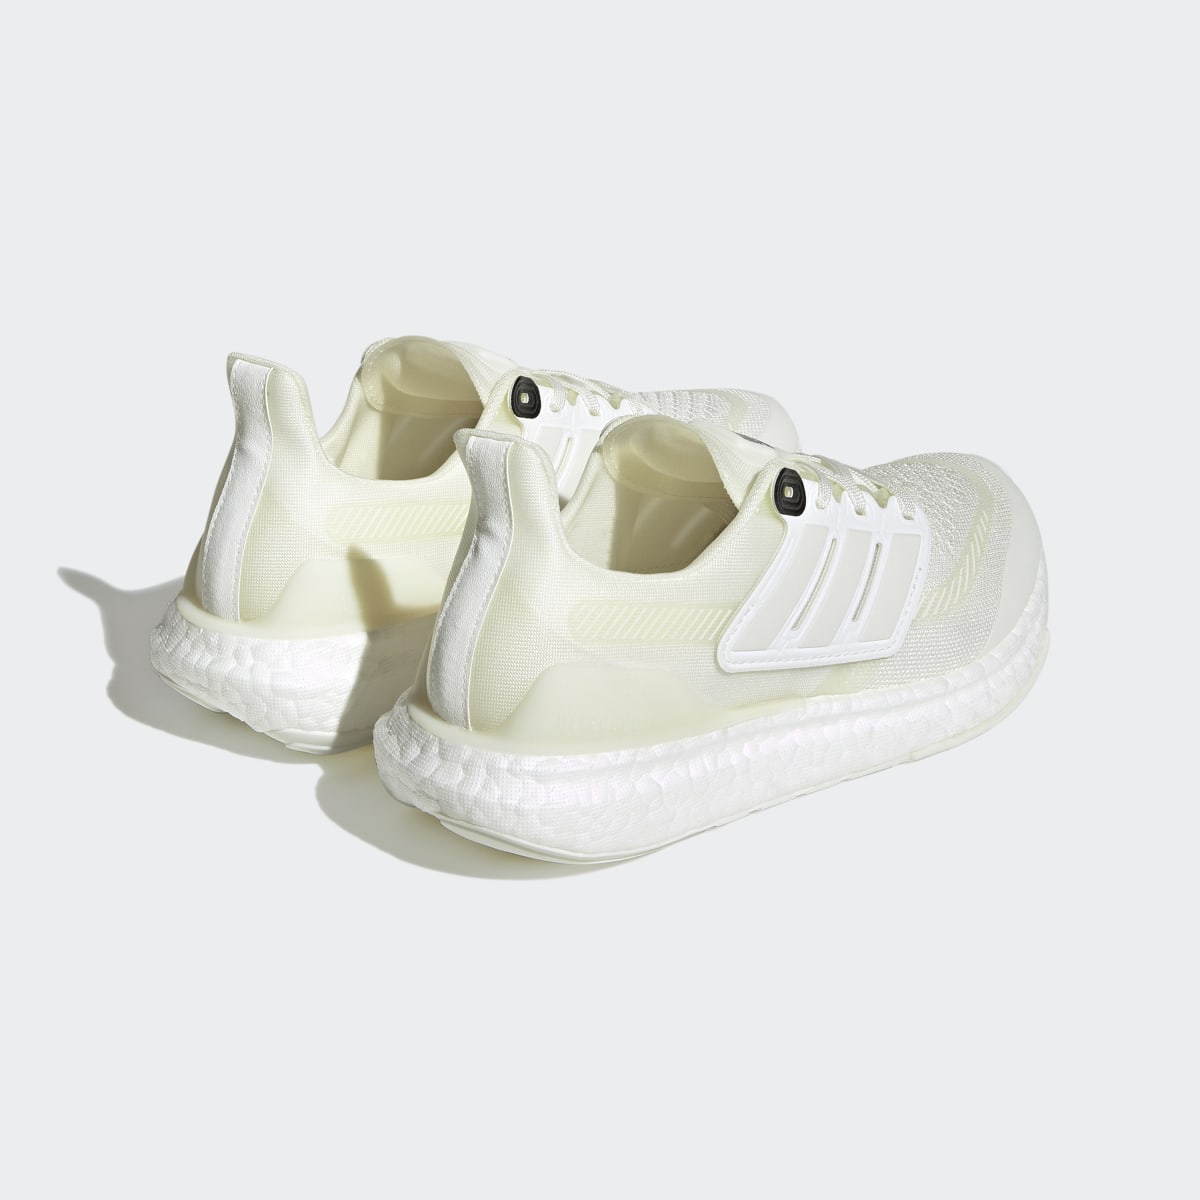 Adidas Zapatilla Ultraboost Made to Be Remade 2.0. 9